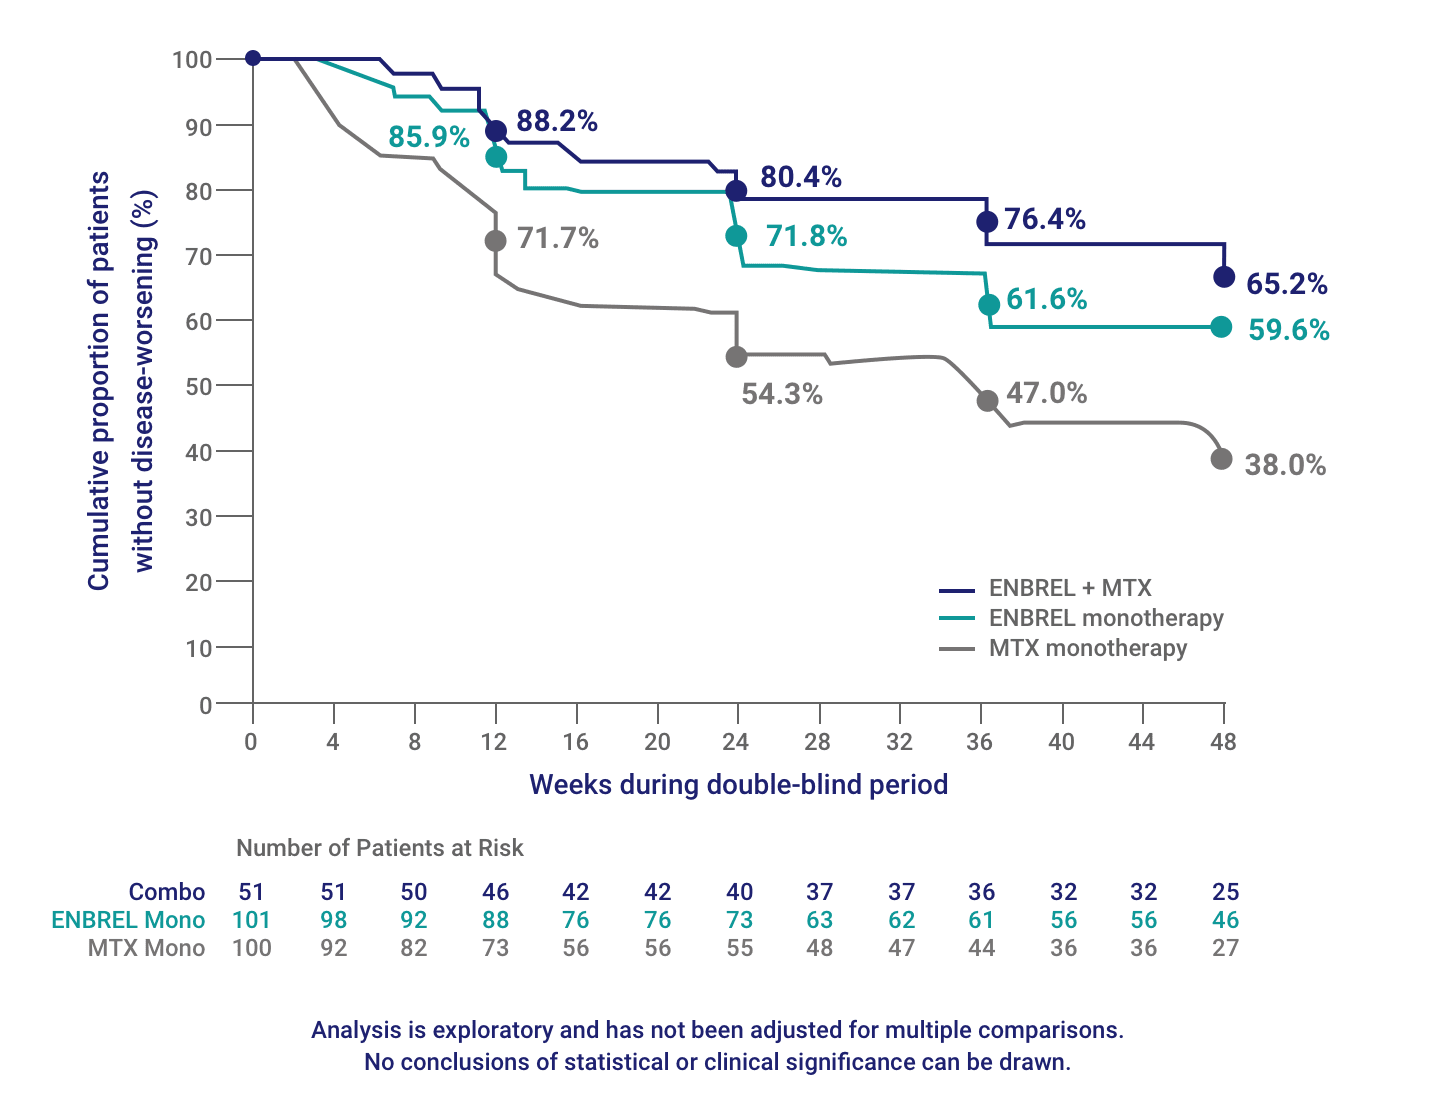 The Kaplan-Meier curves of time to disease-worsening at 48 weeks from the ENBREL SEAM-RA study